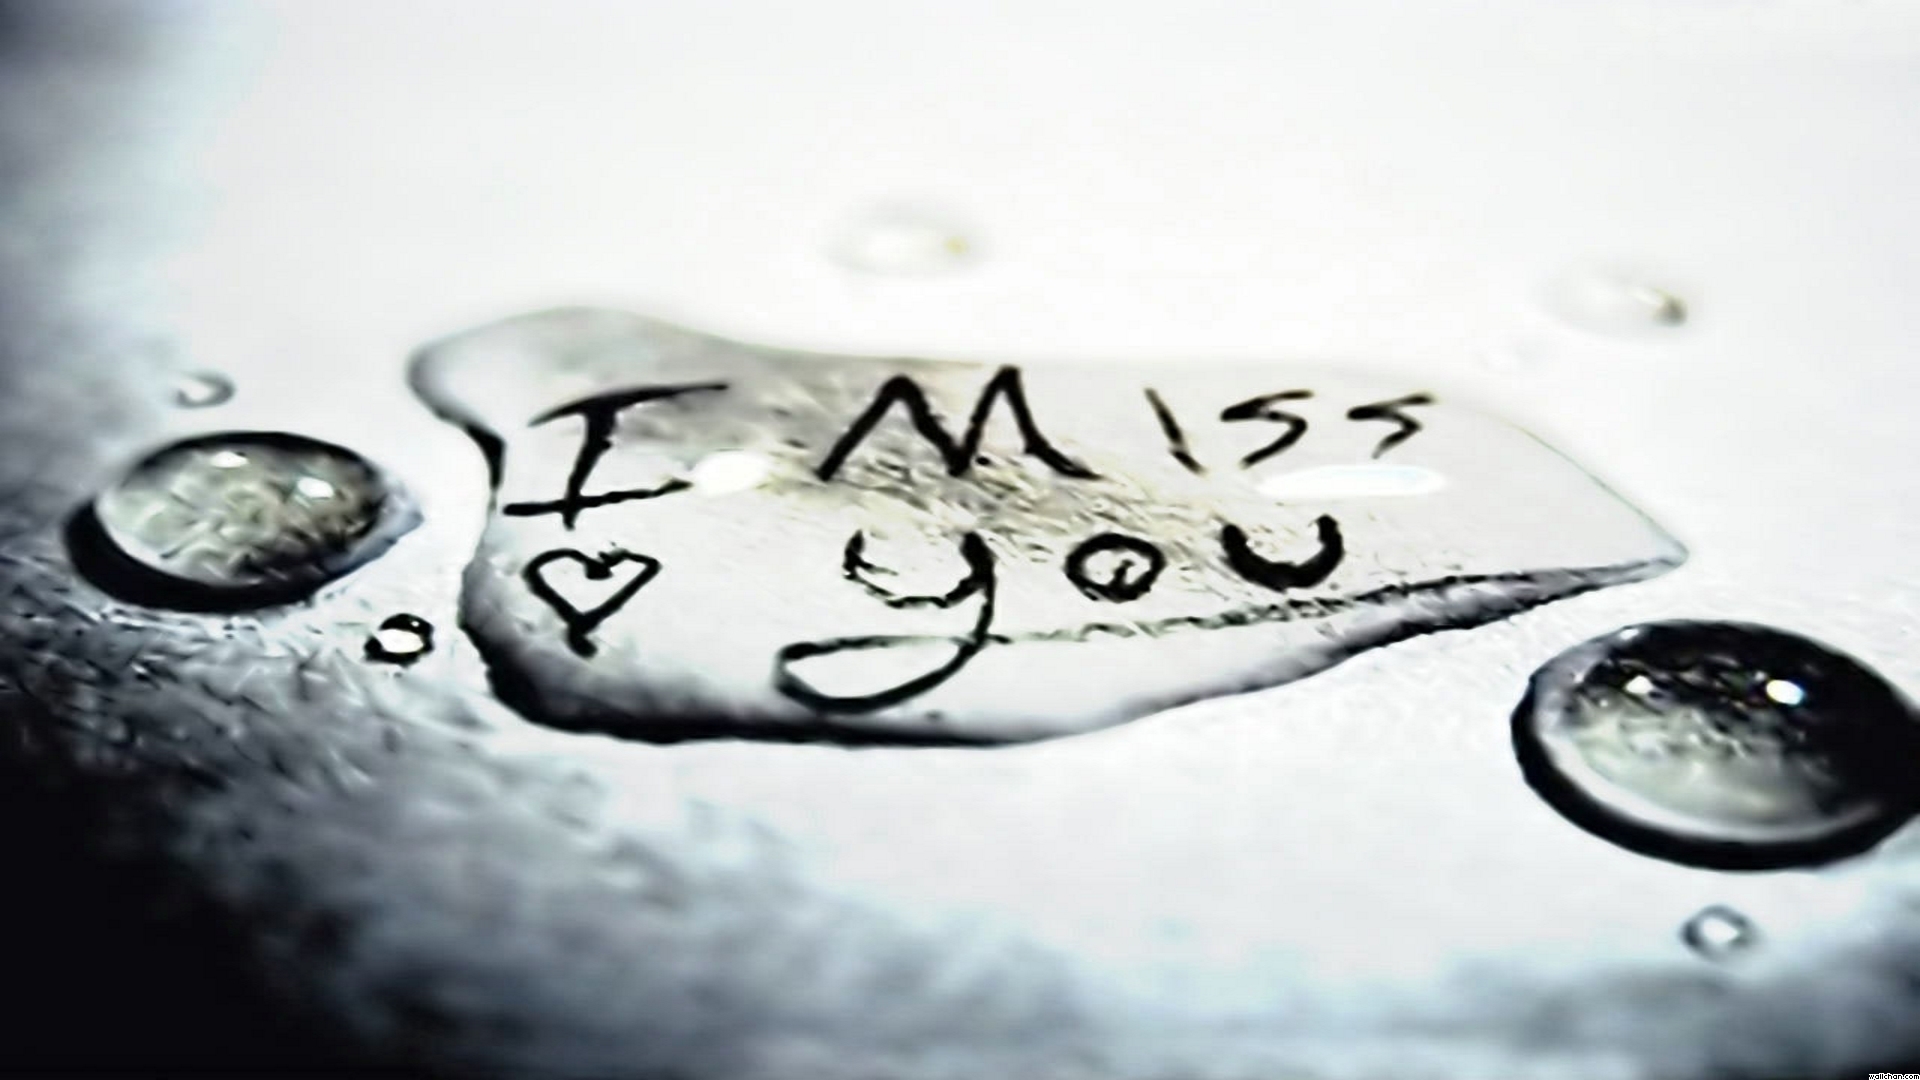 Download I Miss You Wallpaper Hd Wallpapers Pulse